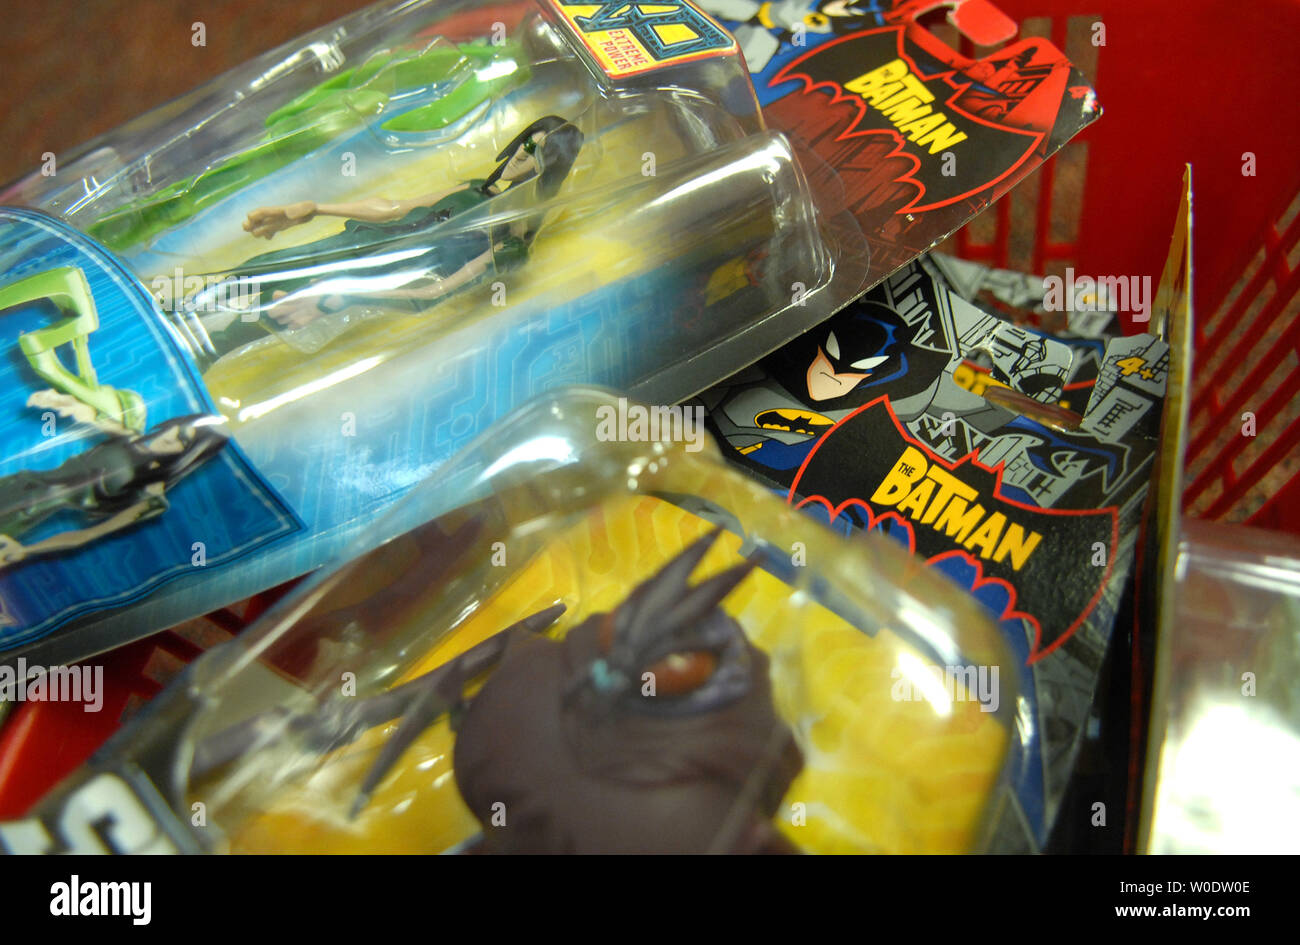 Batman action figures are seen in a basket at Kinder Haus Toy store in Arlington, Virginia on August 14, 2007. Mattel recalled 9 million Chinese made toys, including Polly Pocket play sets, Batman action figures, Fisher-Price toys and some die cast cars because of the presence of lead paint or their use of tiny magnets that could cause a choking hazard. This comes after Cheung Shu-hung, co-owner of A Lee Der Chinese Toy manufacturers, committed suicide at a warehouse following a Chinese ban. (UPI Photo/Kevin Dietsch) Stock Photo